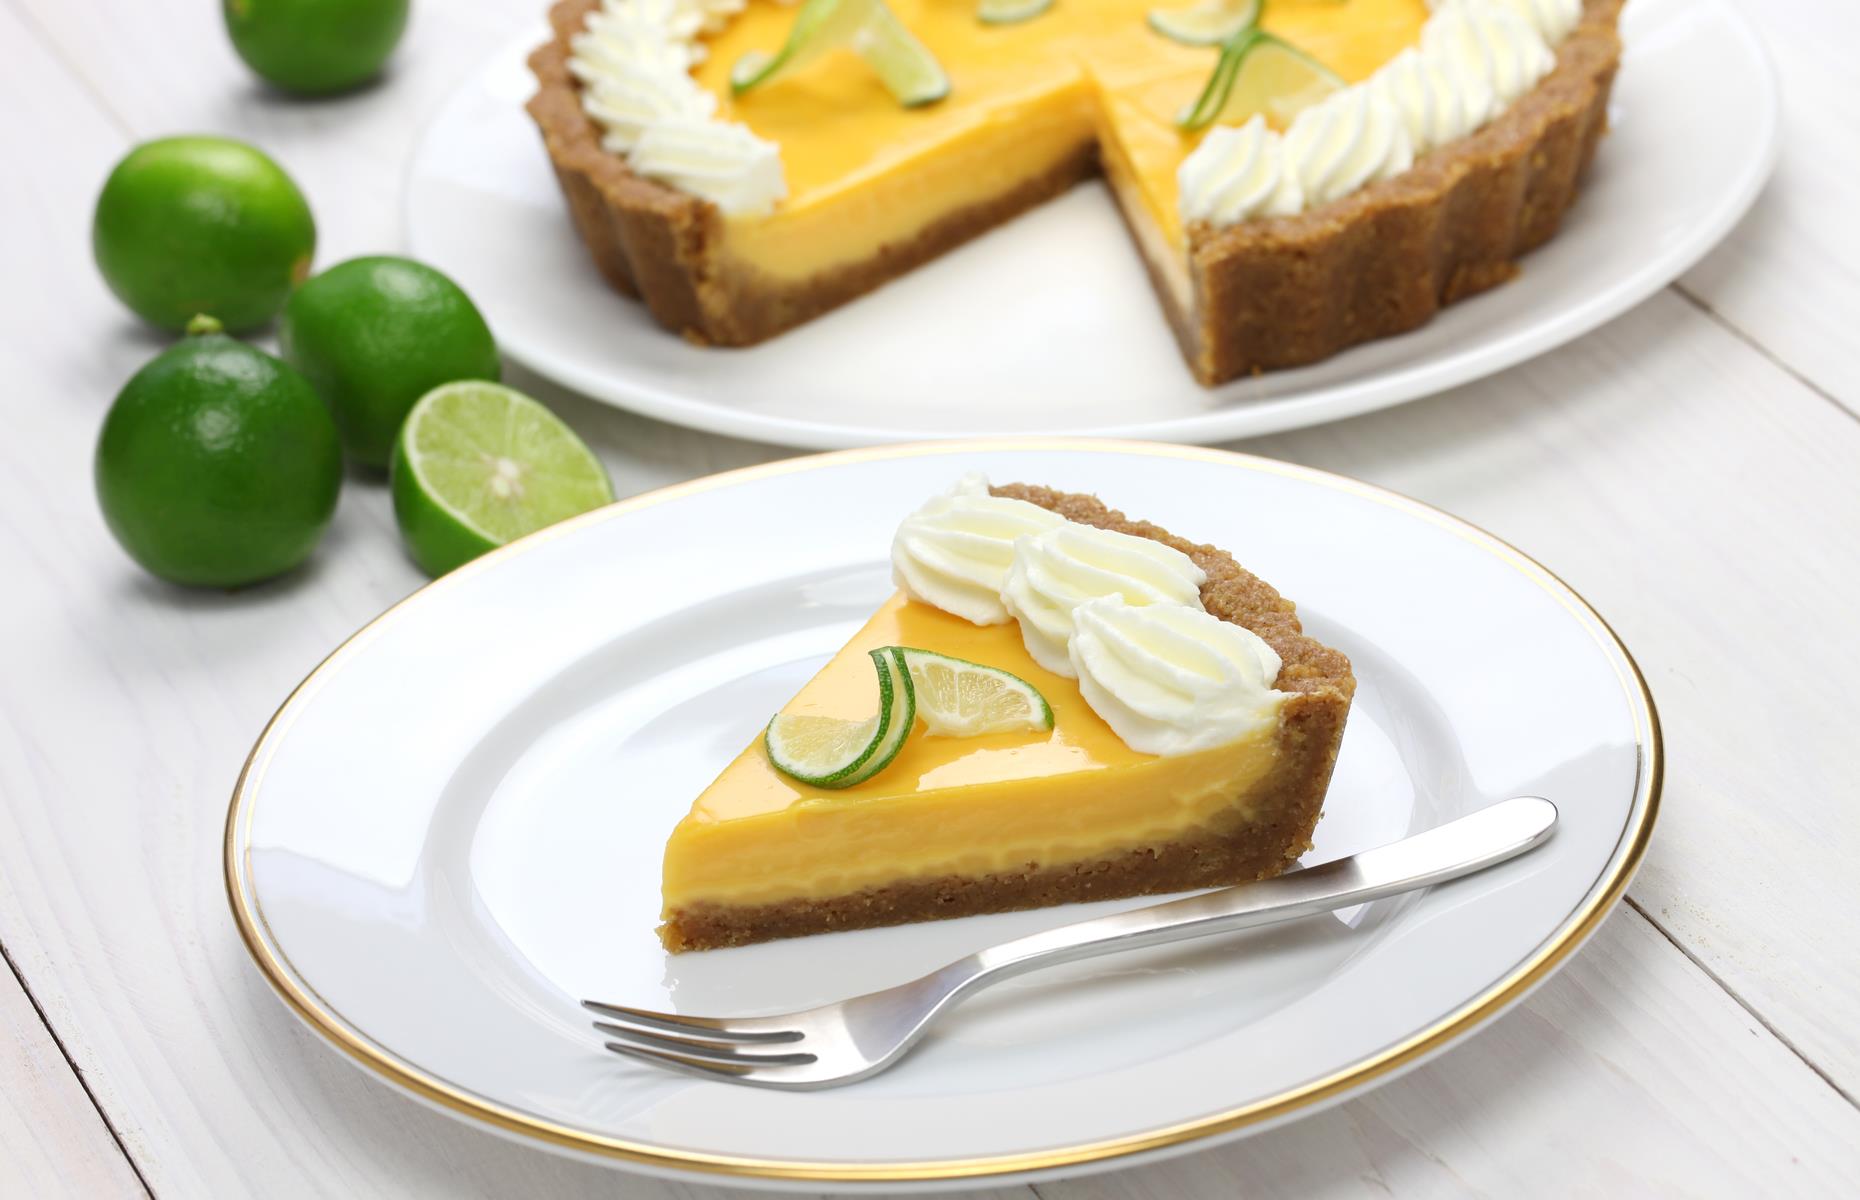 <p>Key West legend has it that the dreamy pie was first created by a cook, known as ‘Aunt Sally’, who worked for millionaire William Curry in the late 19th century. But <a href="https://www.foodandwine.com/news/key-lime-pie-origins-debate-stella-parks-bravetart">a more recent theory</a> suggests the pie was invented by milk company Borden in its New York test kitchen, with the recipe published in 1931. Nevertheless it became Florida’s official pie in 2006 and is such an important part of Key West heritage that there’s an annual festival in its honor.</p>  <p><a href="https://www.lovefood.com/galleries/93756/americas-most-historic-pies-whose-recipes-have-never-changed?page=1"><strong>Discover more of America's most historic pies whose recipes have never changed</strong></a></p>